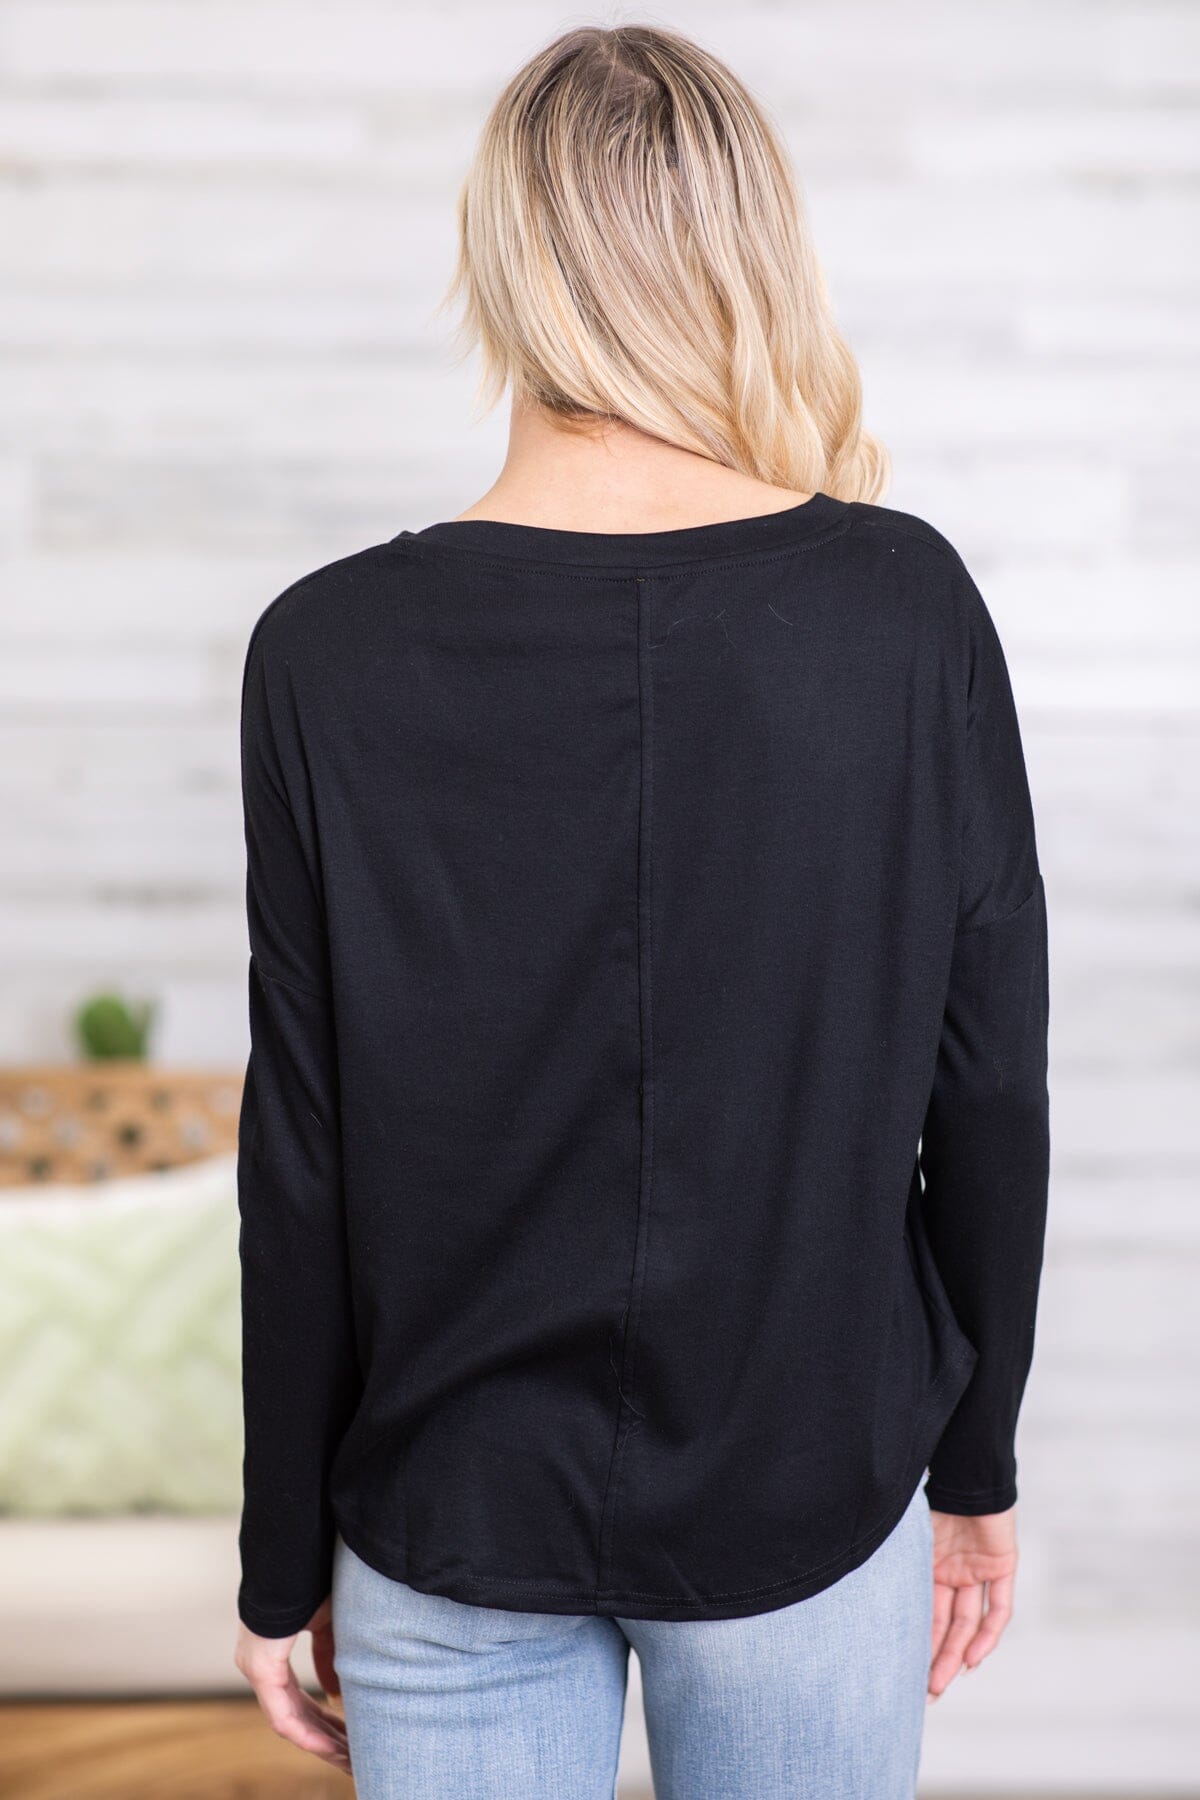 Black V-Neck Long Sleeve Top - Filly Flair